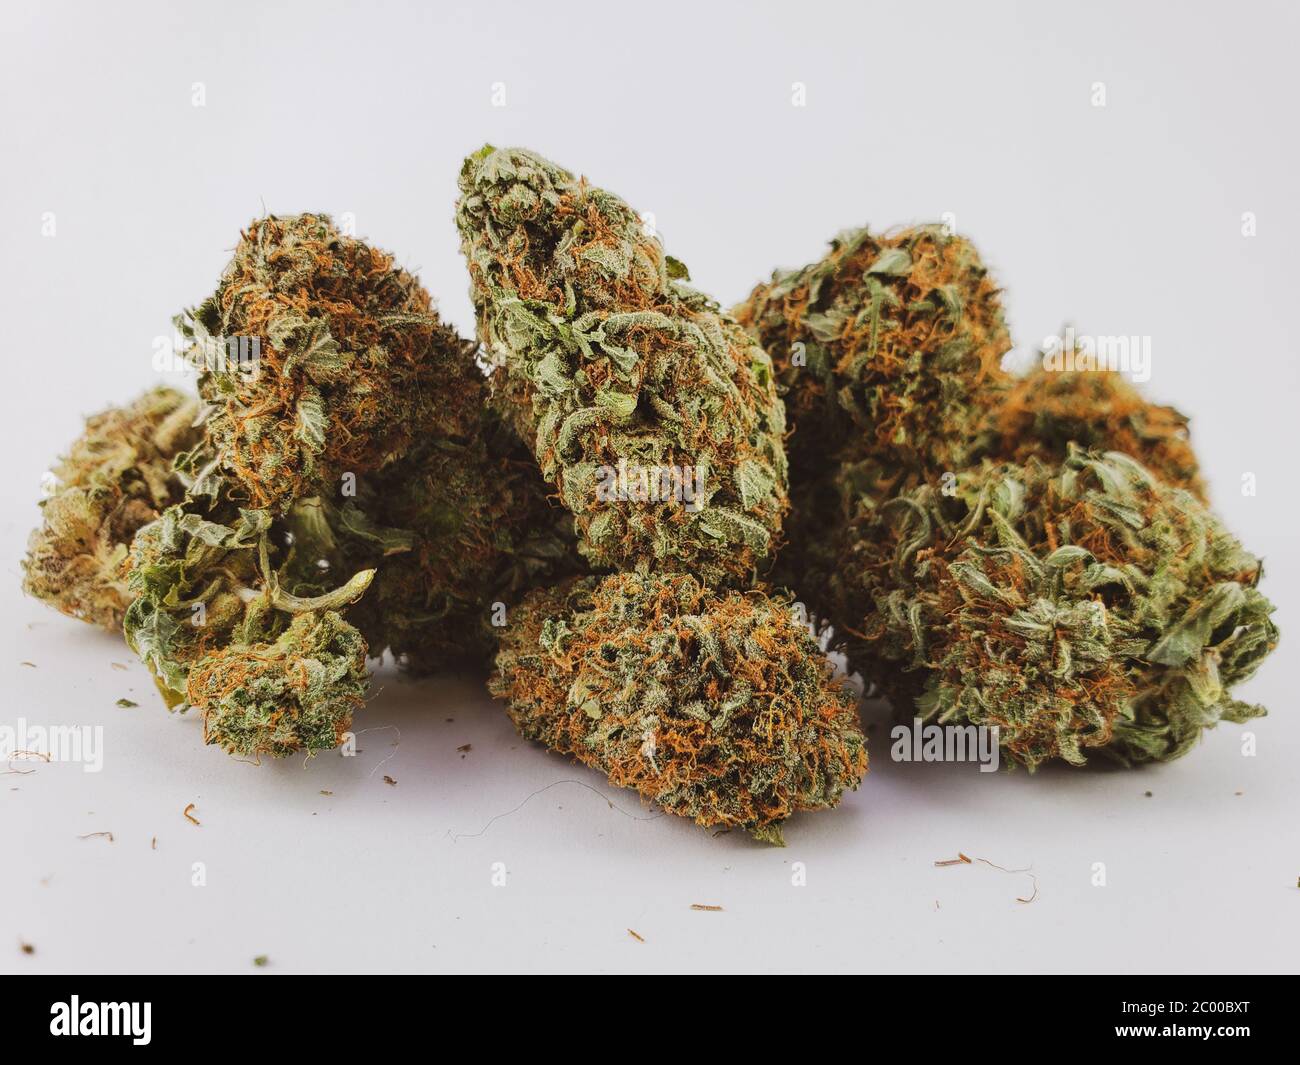 Group of dried flower sativa strain cannabis buds in front of a white background Stock Photo